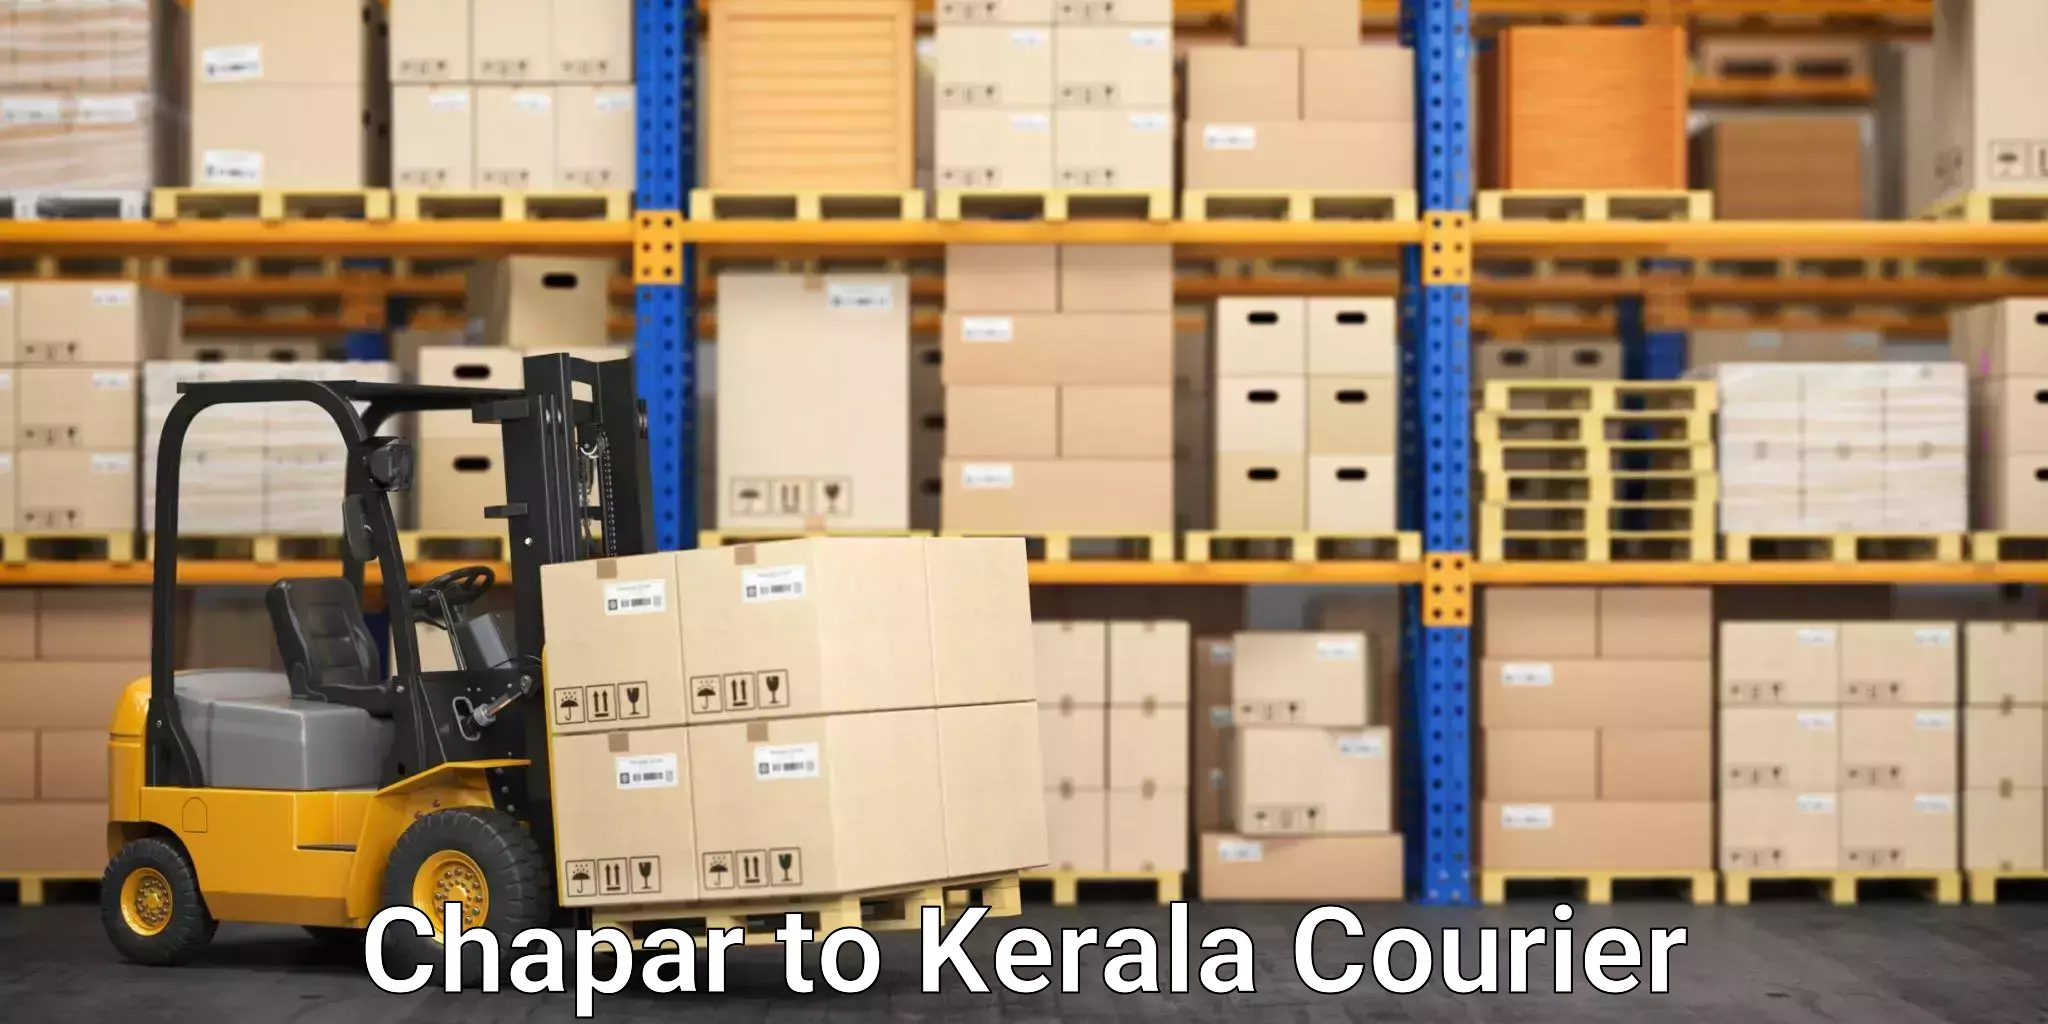 Global shipping networks Chapar to Chalakudy